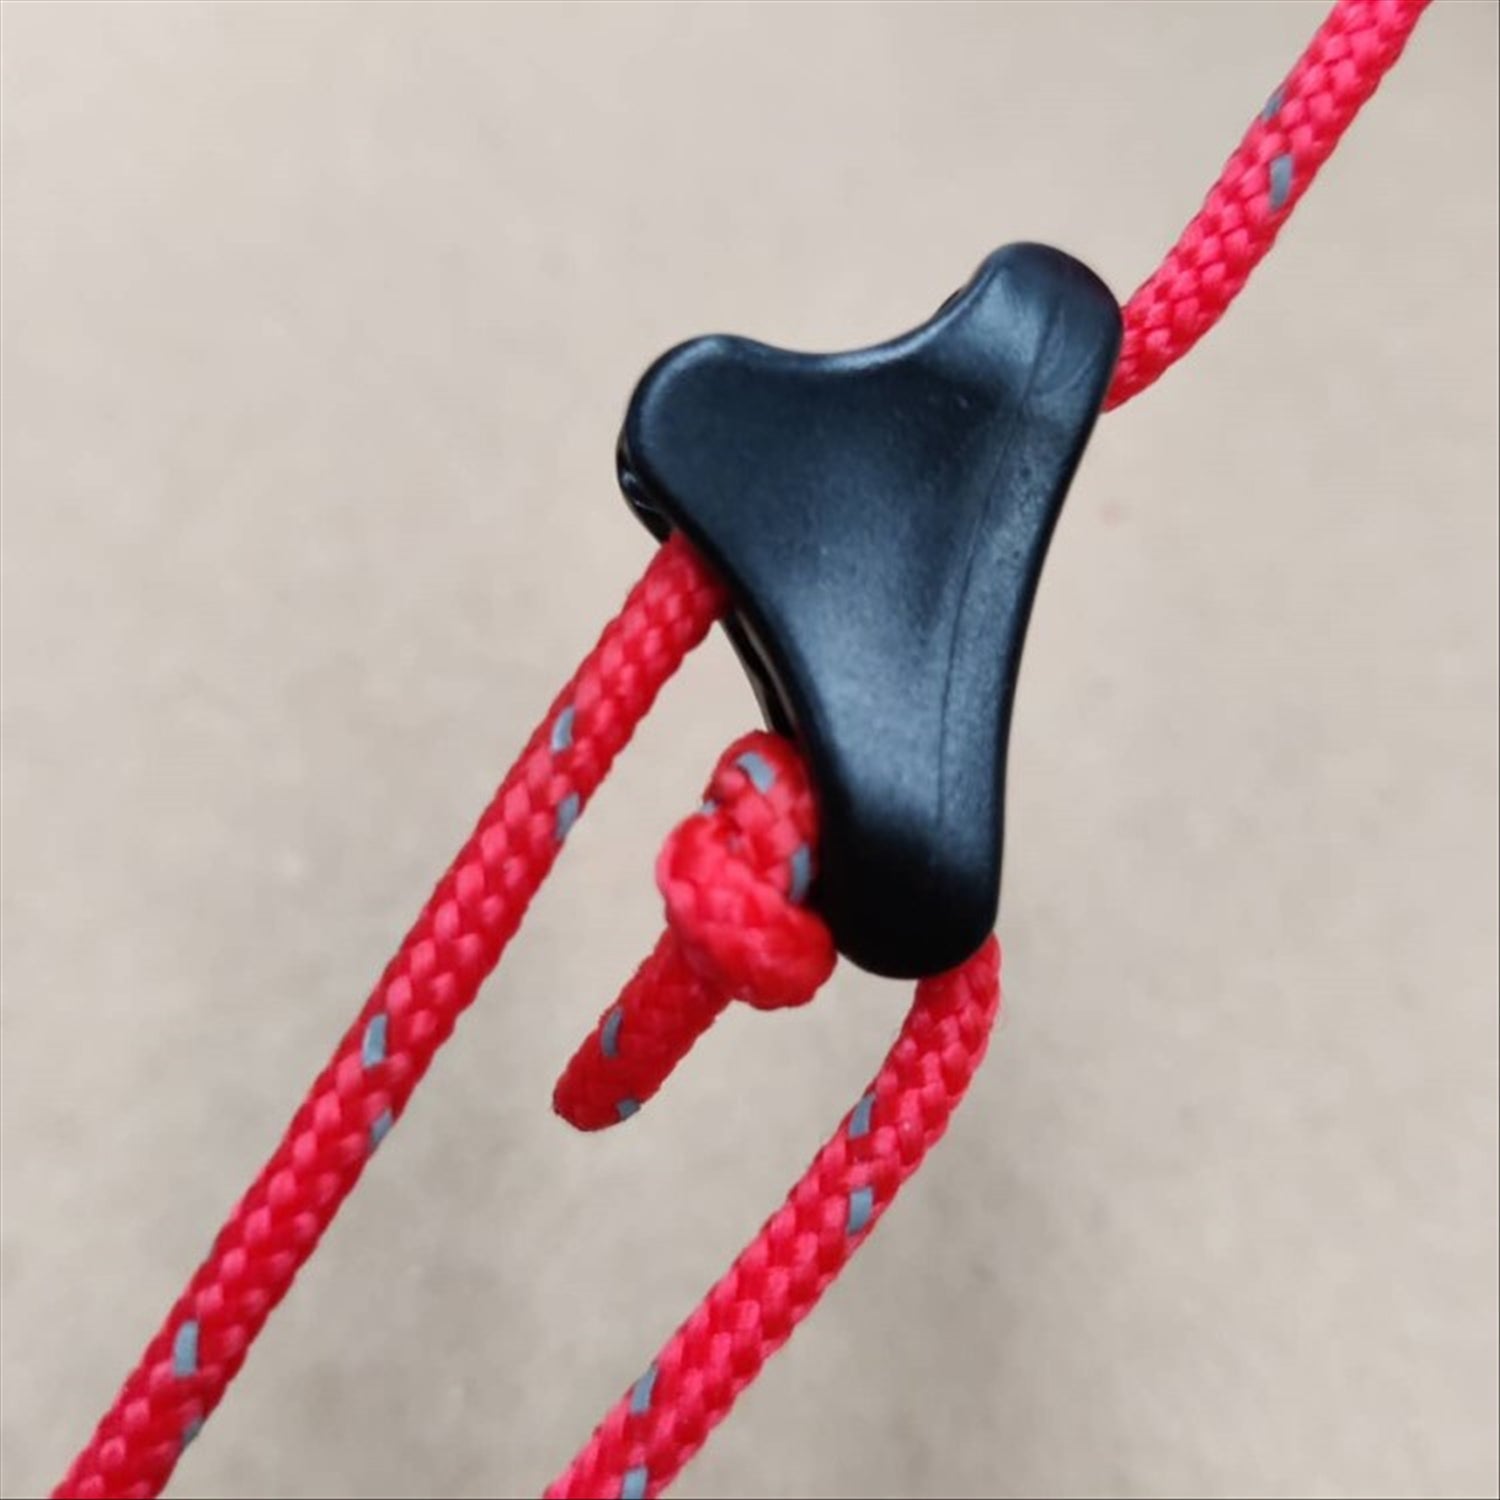 Tenioners - Triangle Line Locks for 2-3mm guy rope